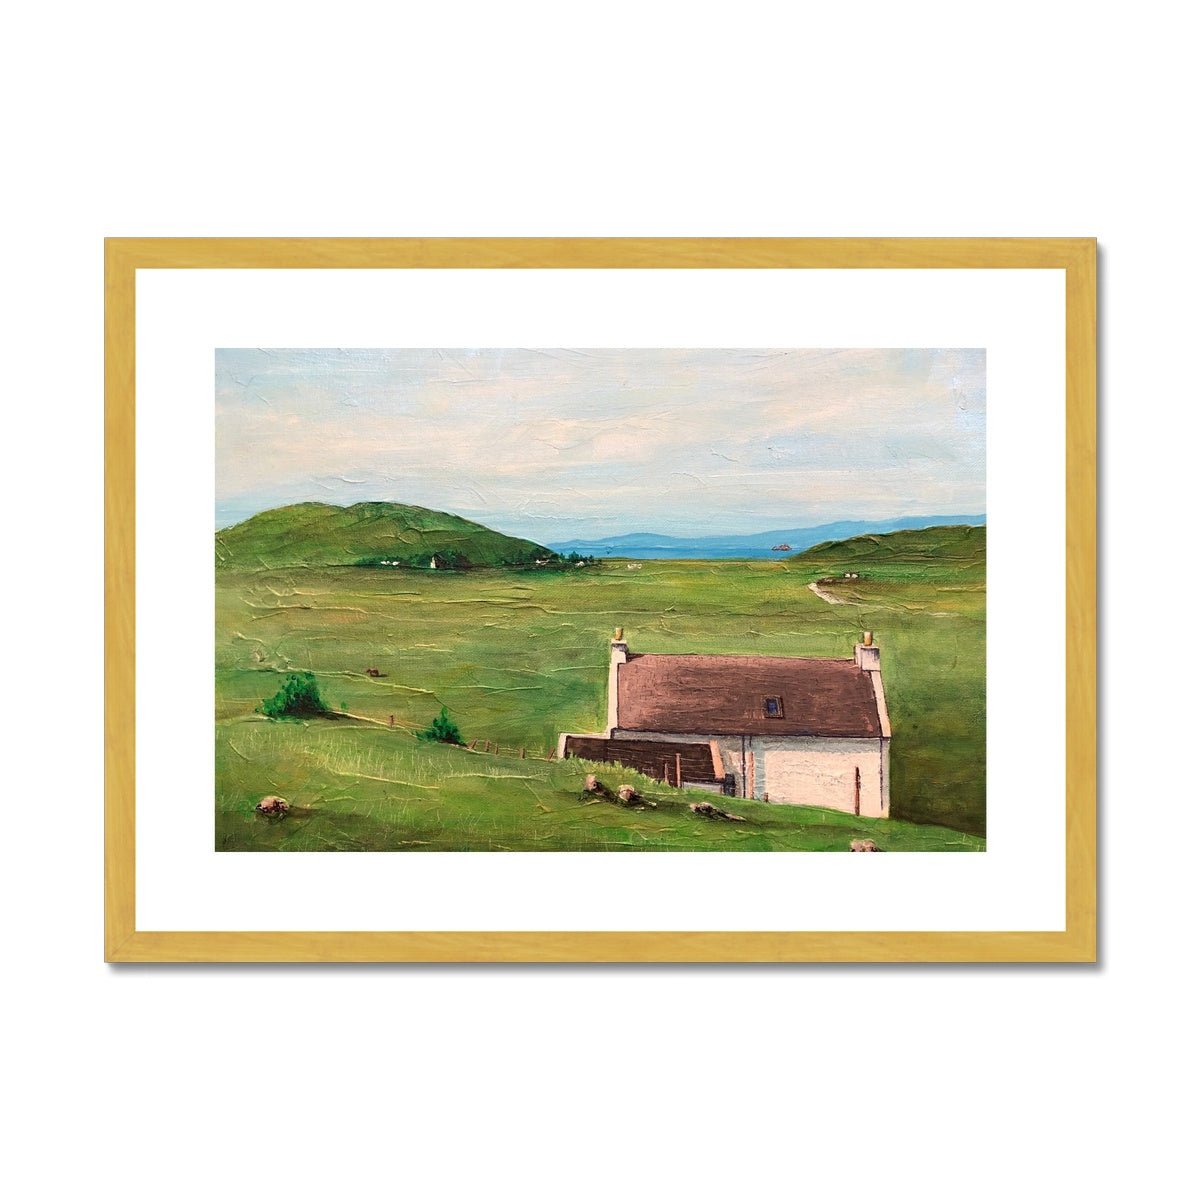 A Skye Cottage Painting | Antique Framed & Mounted Prints From Scotland-Antique Framed & Mounted Prints-Skye Art Gallery-A2 Landscape-Gold Frame-Paintings, Prints, Homeware, Art Gifts From Scotland By Scottish Artist Kevin Hunter